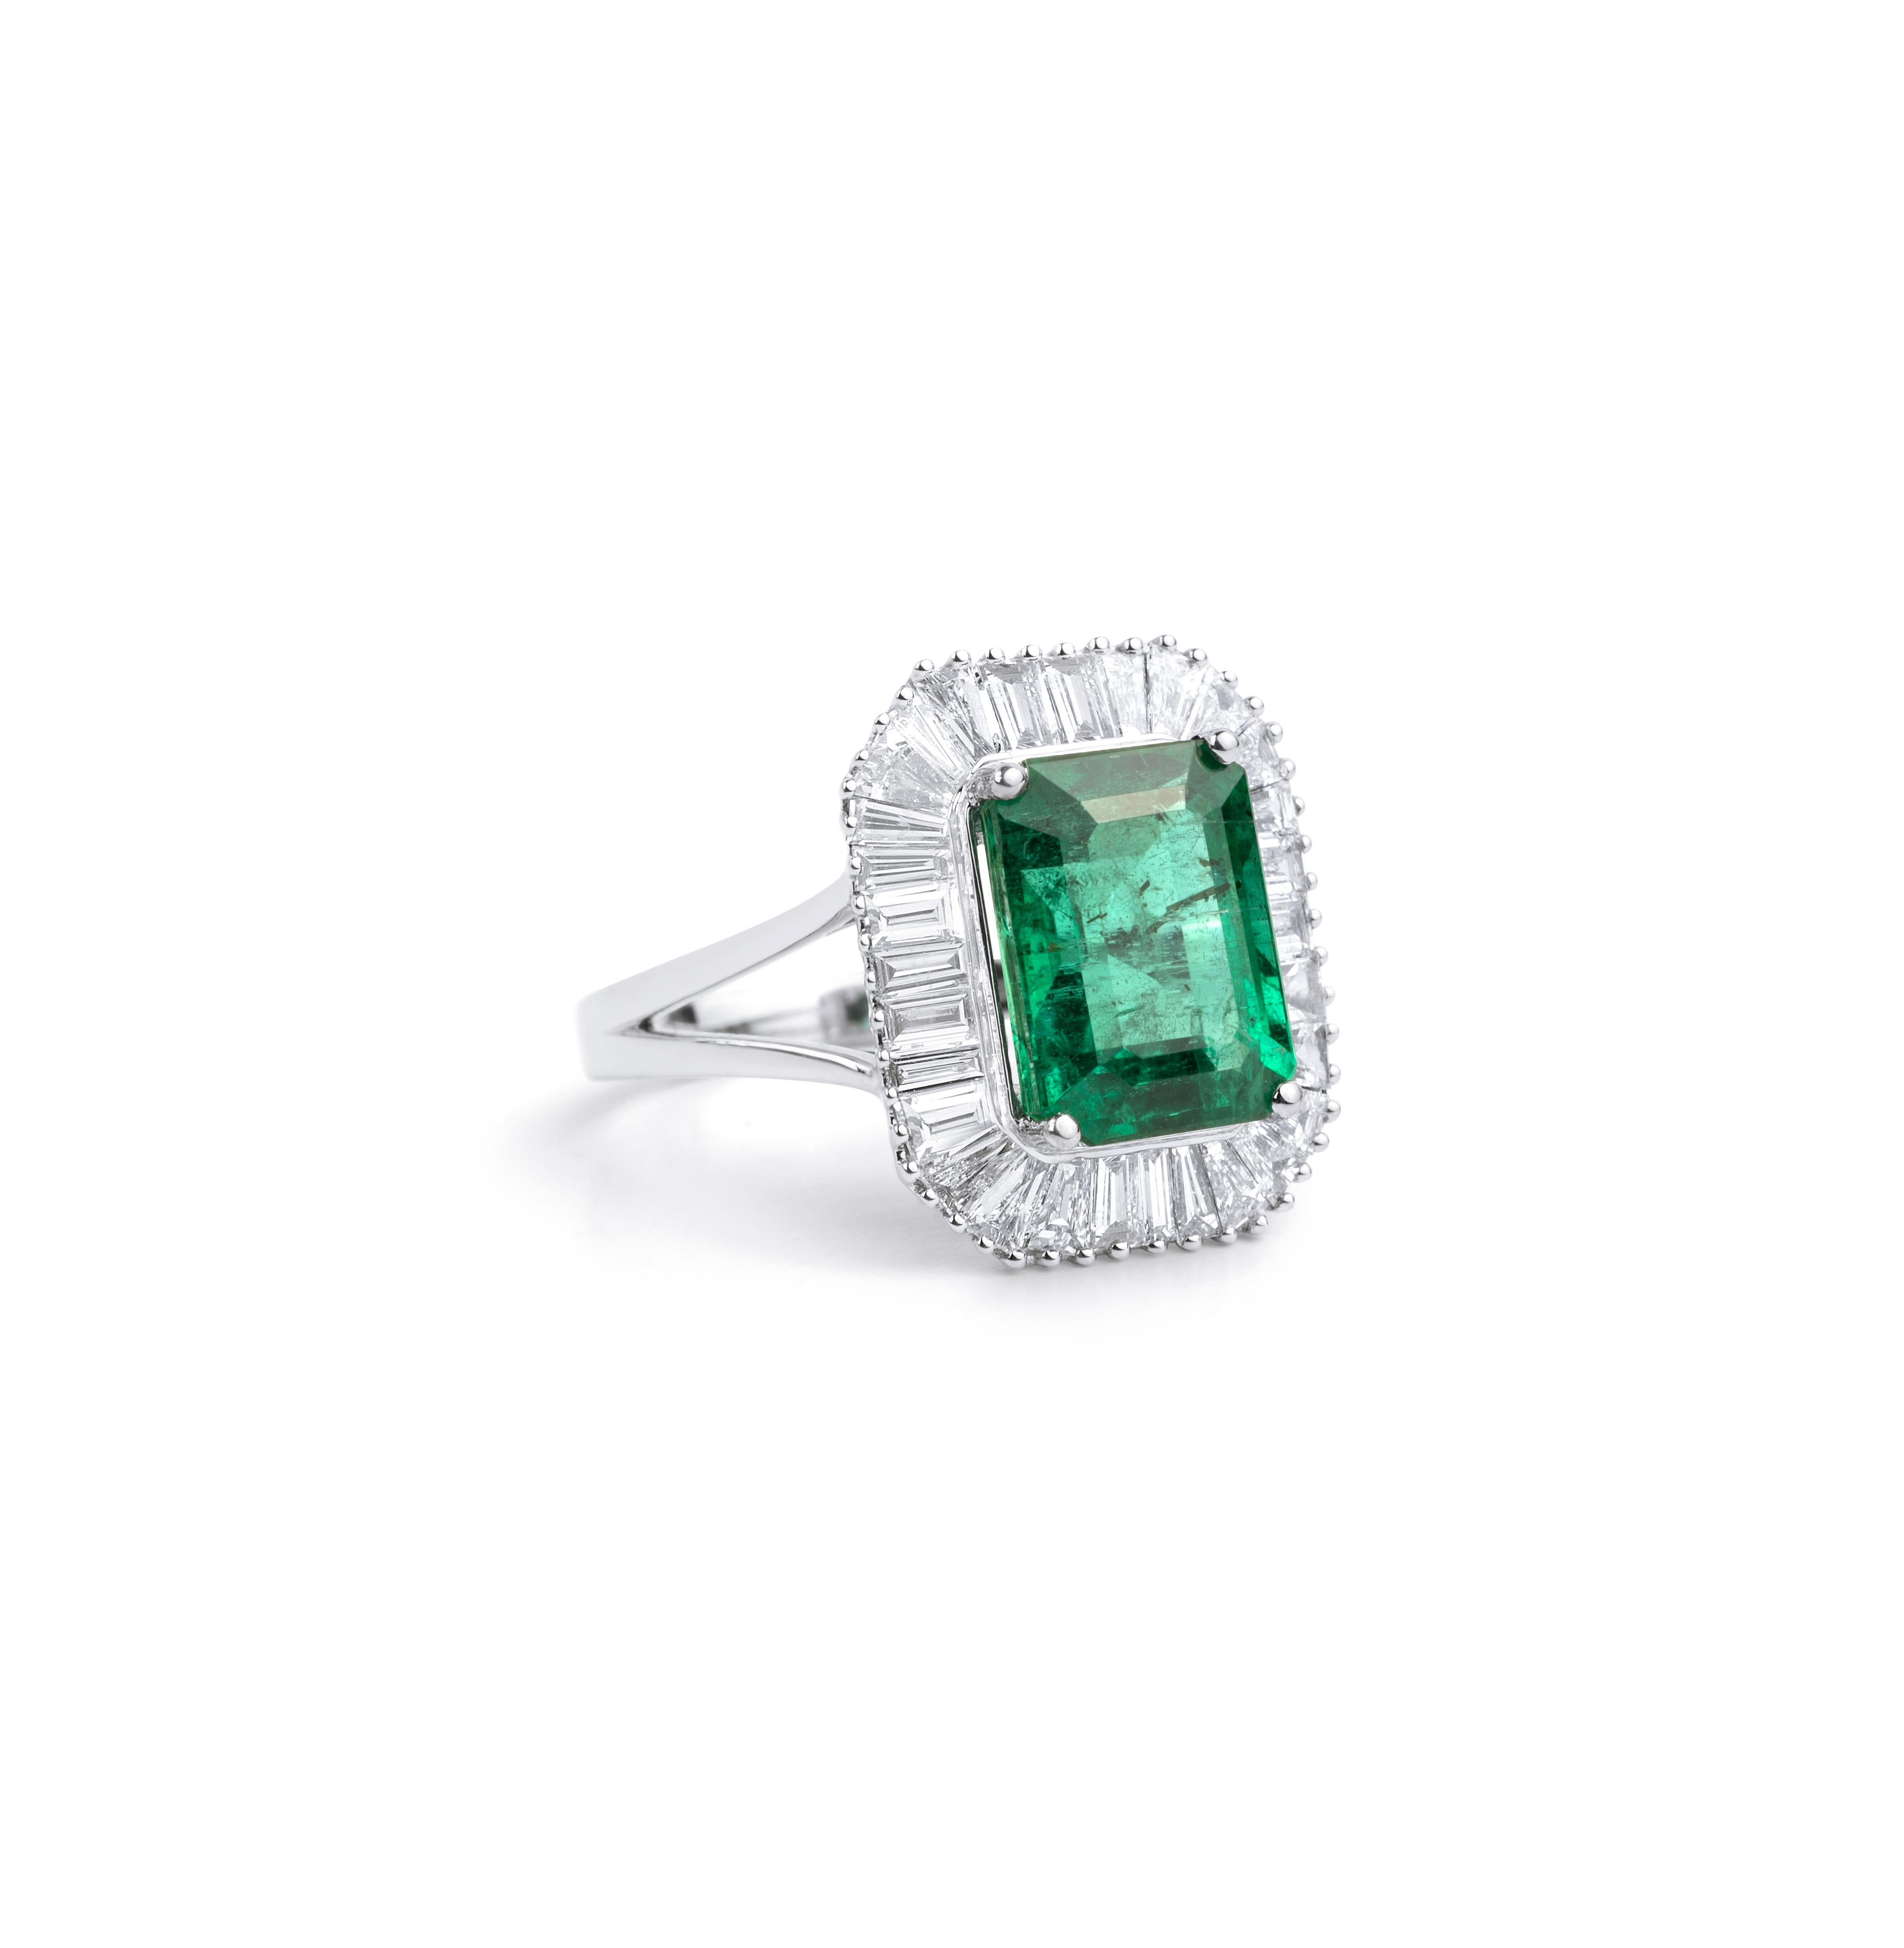 Emerald Cut 4 Carat Natural Emerald Diamond Cocktail Engagement Ring 18k White Gold For Sale